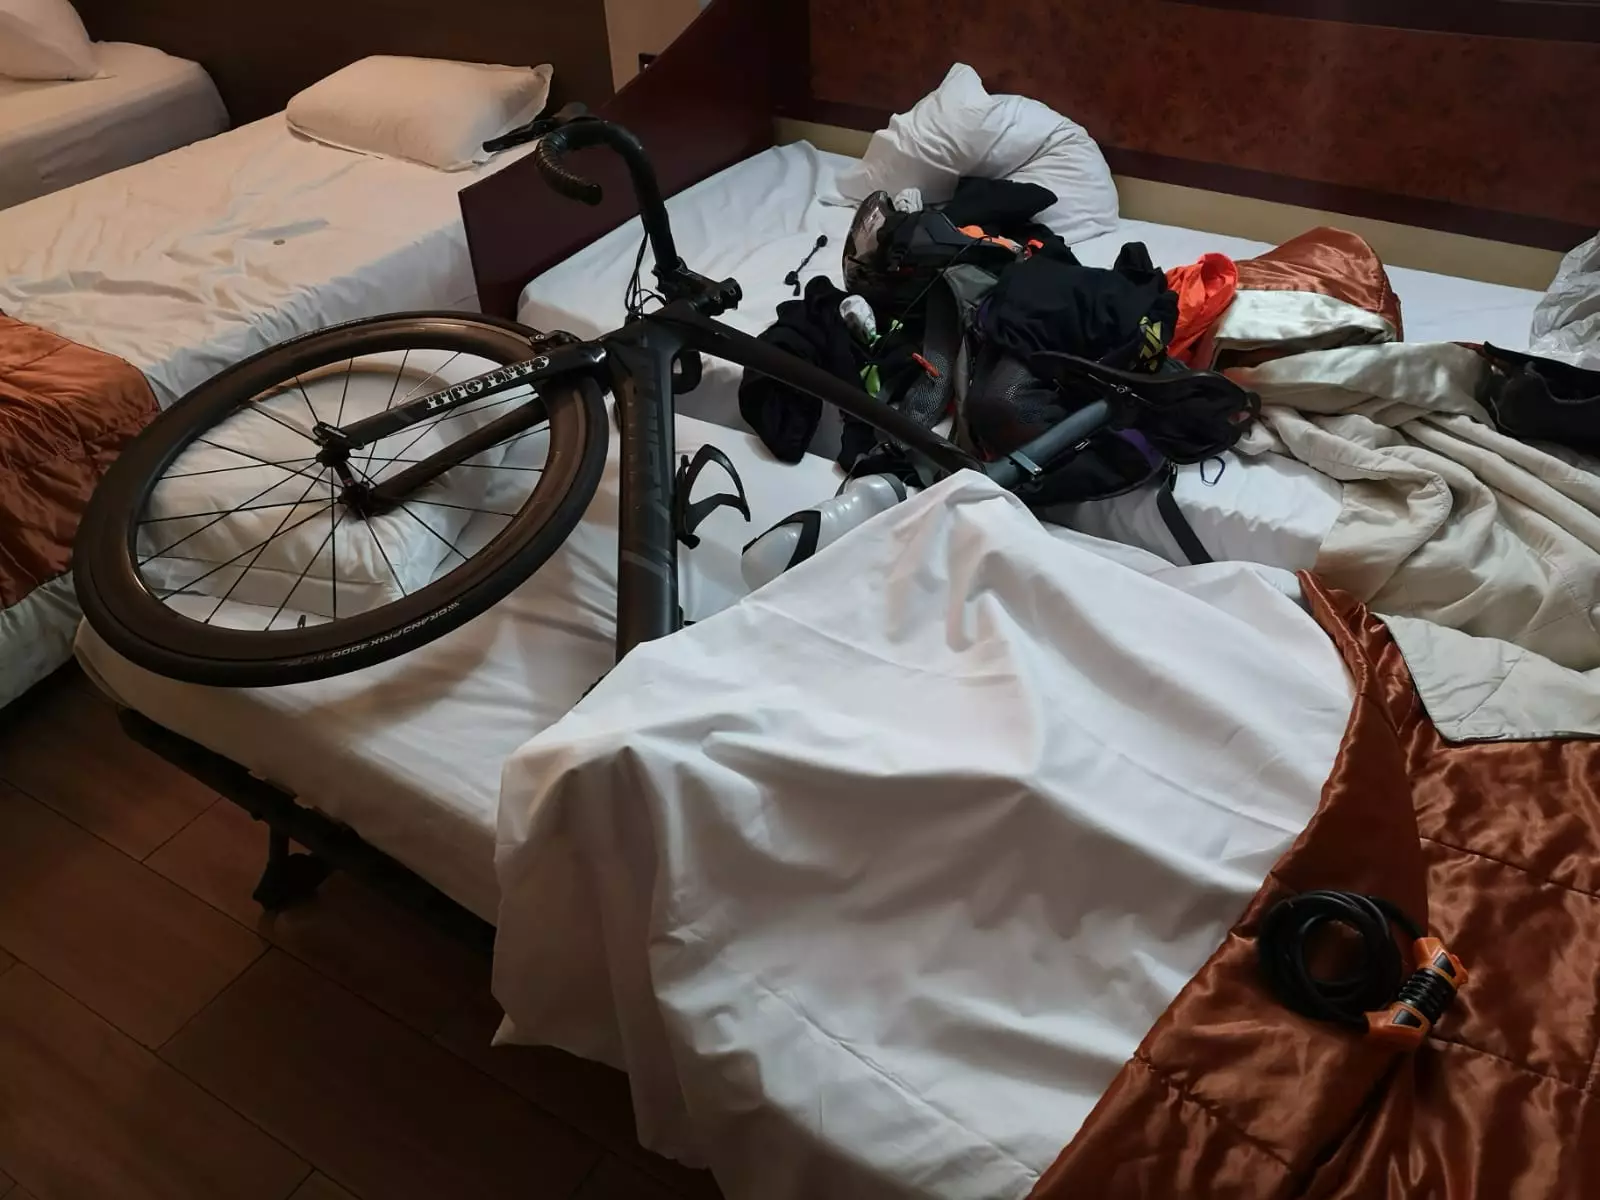 One of the bikes tucked up in bed.